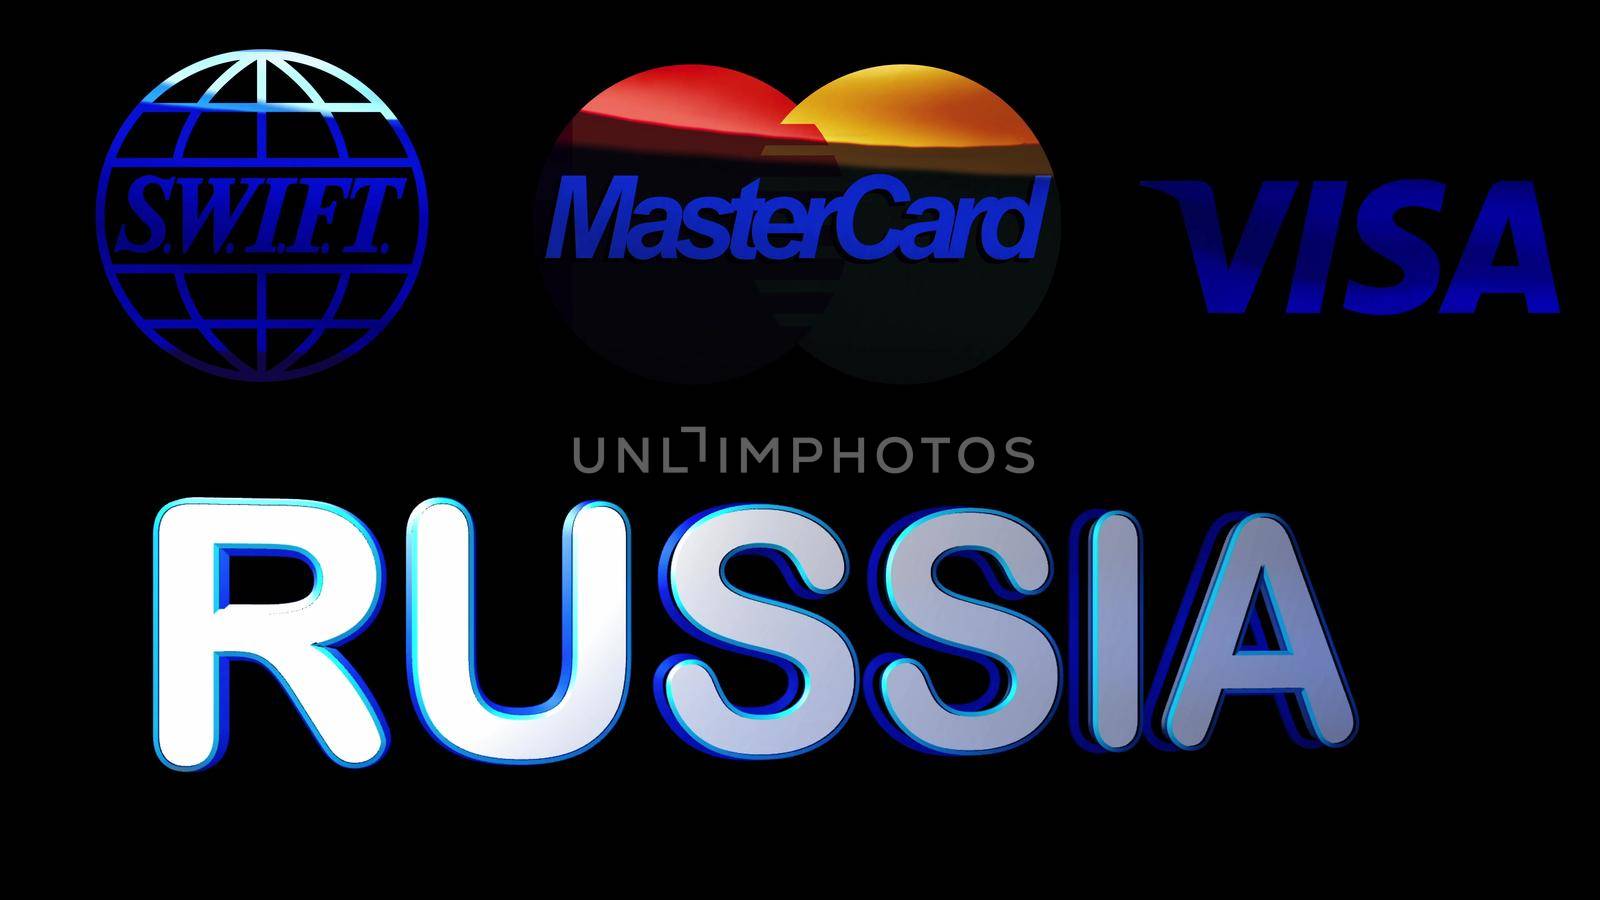 Russia, Syzran - FEBRUARY 27, 2022: Russia and swift, visa, mastercard signs, animated text on a black background, disconnecting Russia from international payments, imposing sanctions. by vadiar